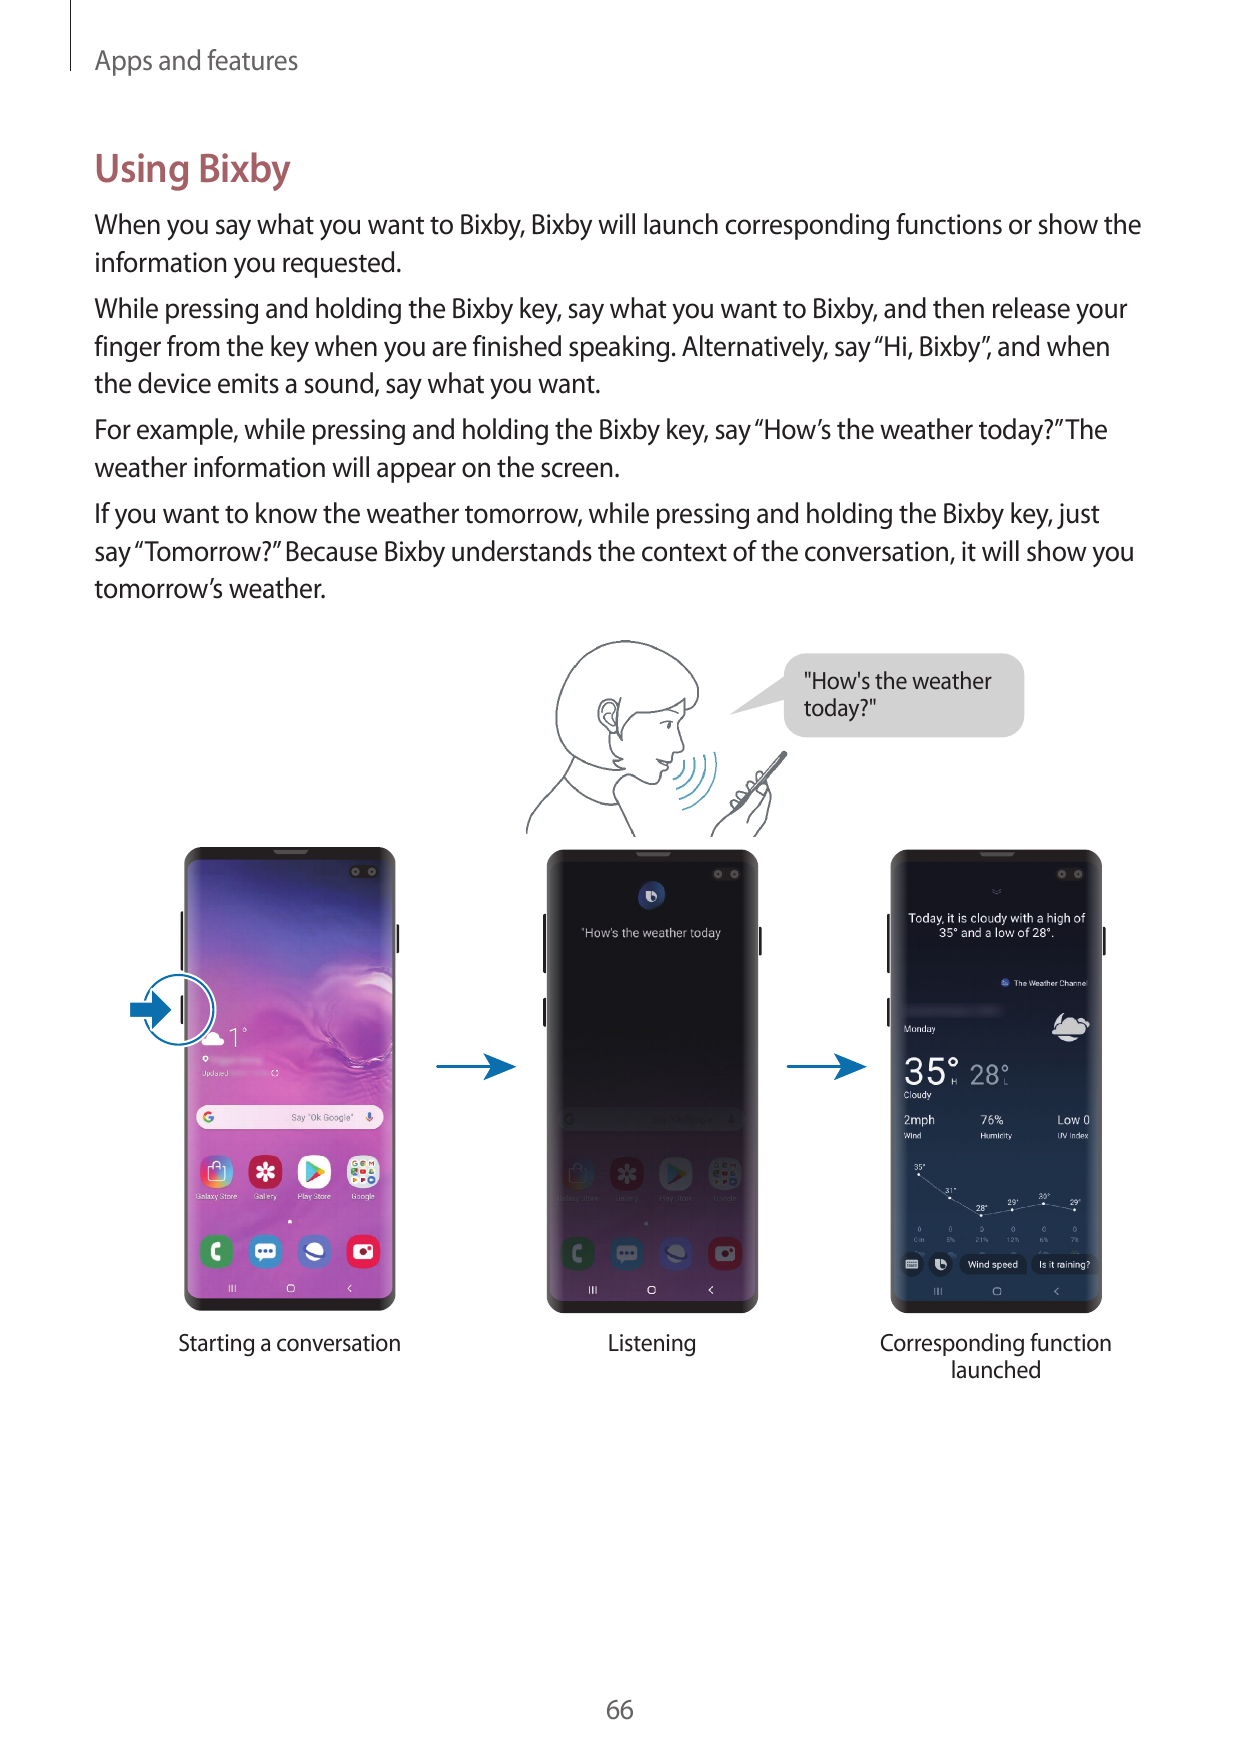 Apps and featuresUsing BixbyWhen you say what you want to Bixby, Bixby will launch corresponding functions or show theinformatio